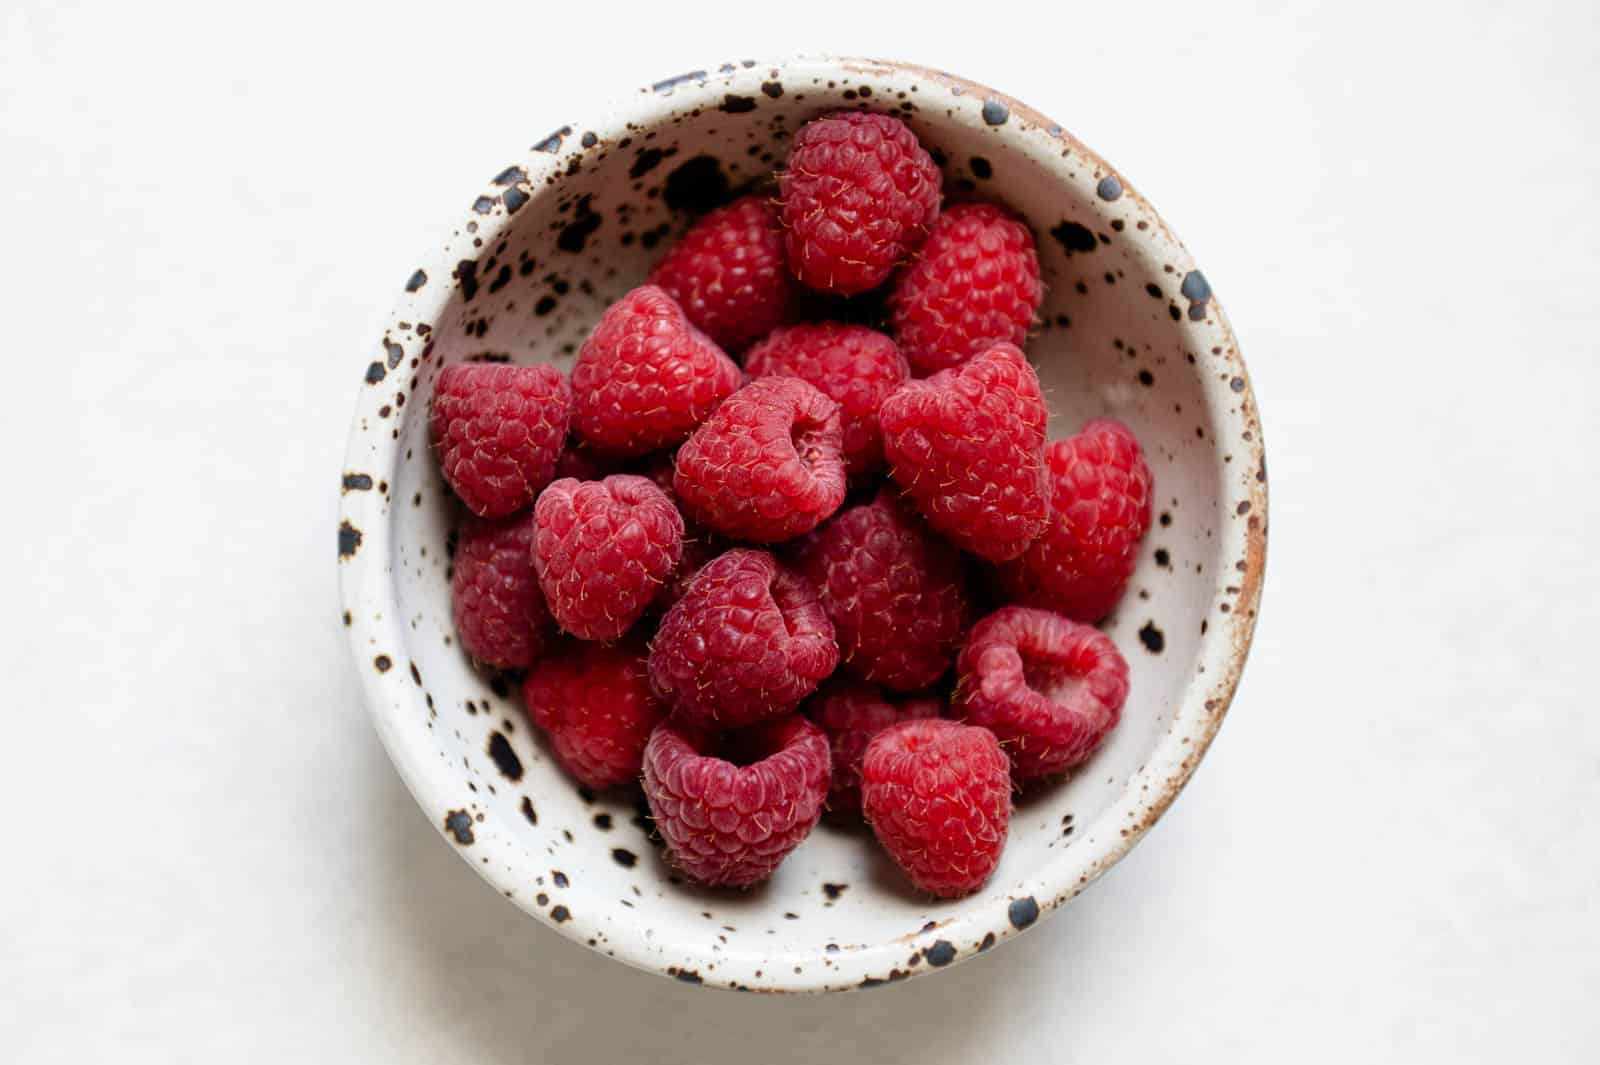 Raspberries in a bowl July Produce Guide | Healthy Nibbles by Lisa Lin July Produce Guide | Healthy Nibbles by Lisa Lin Raspberries